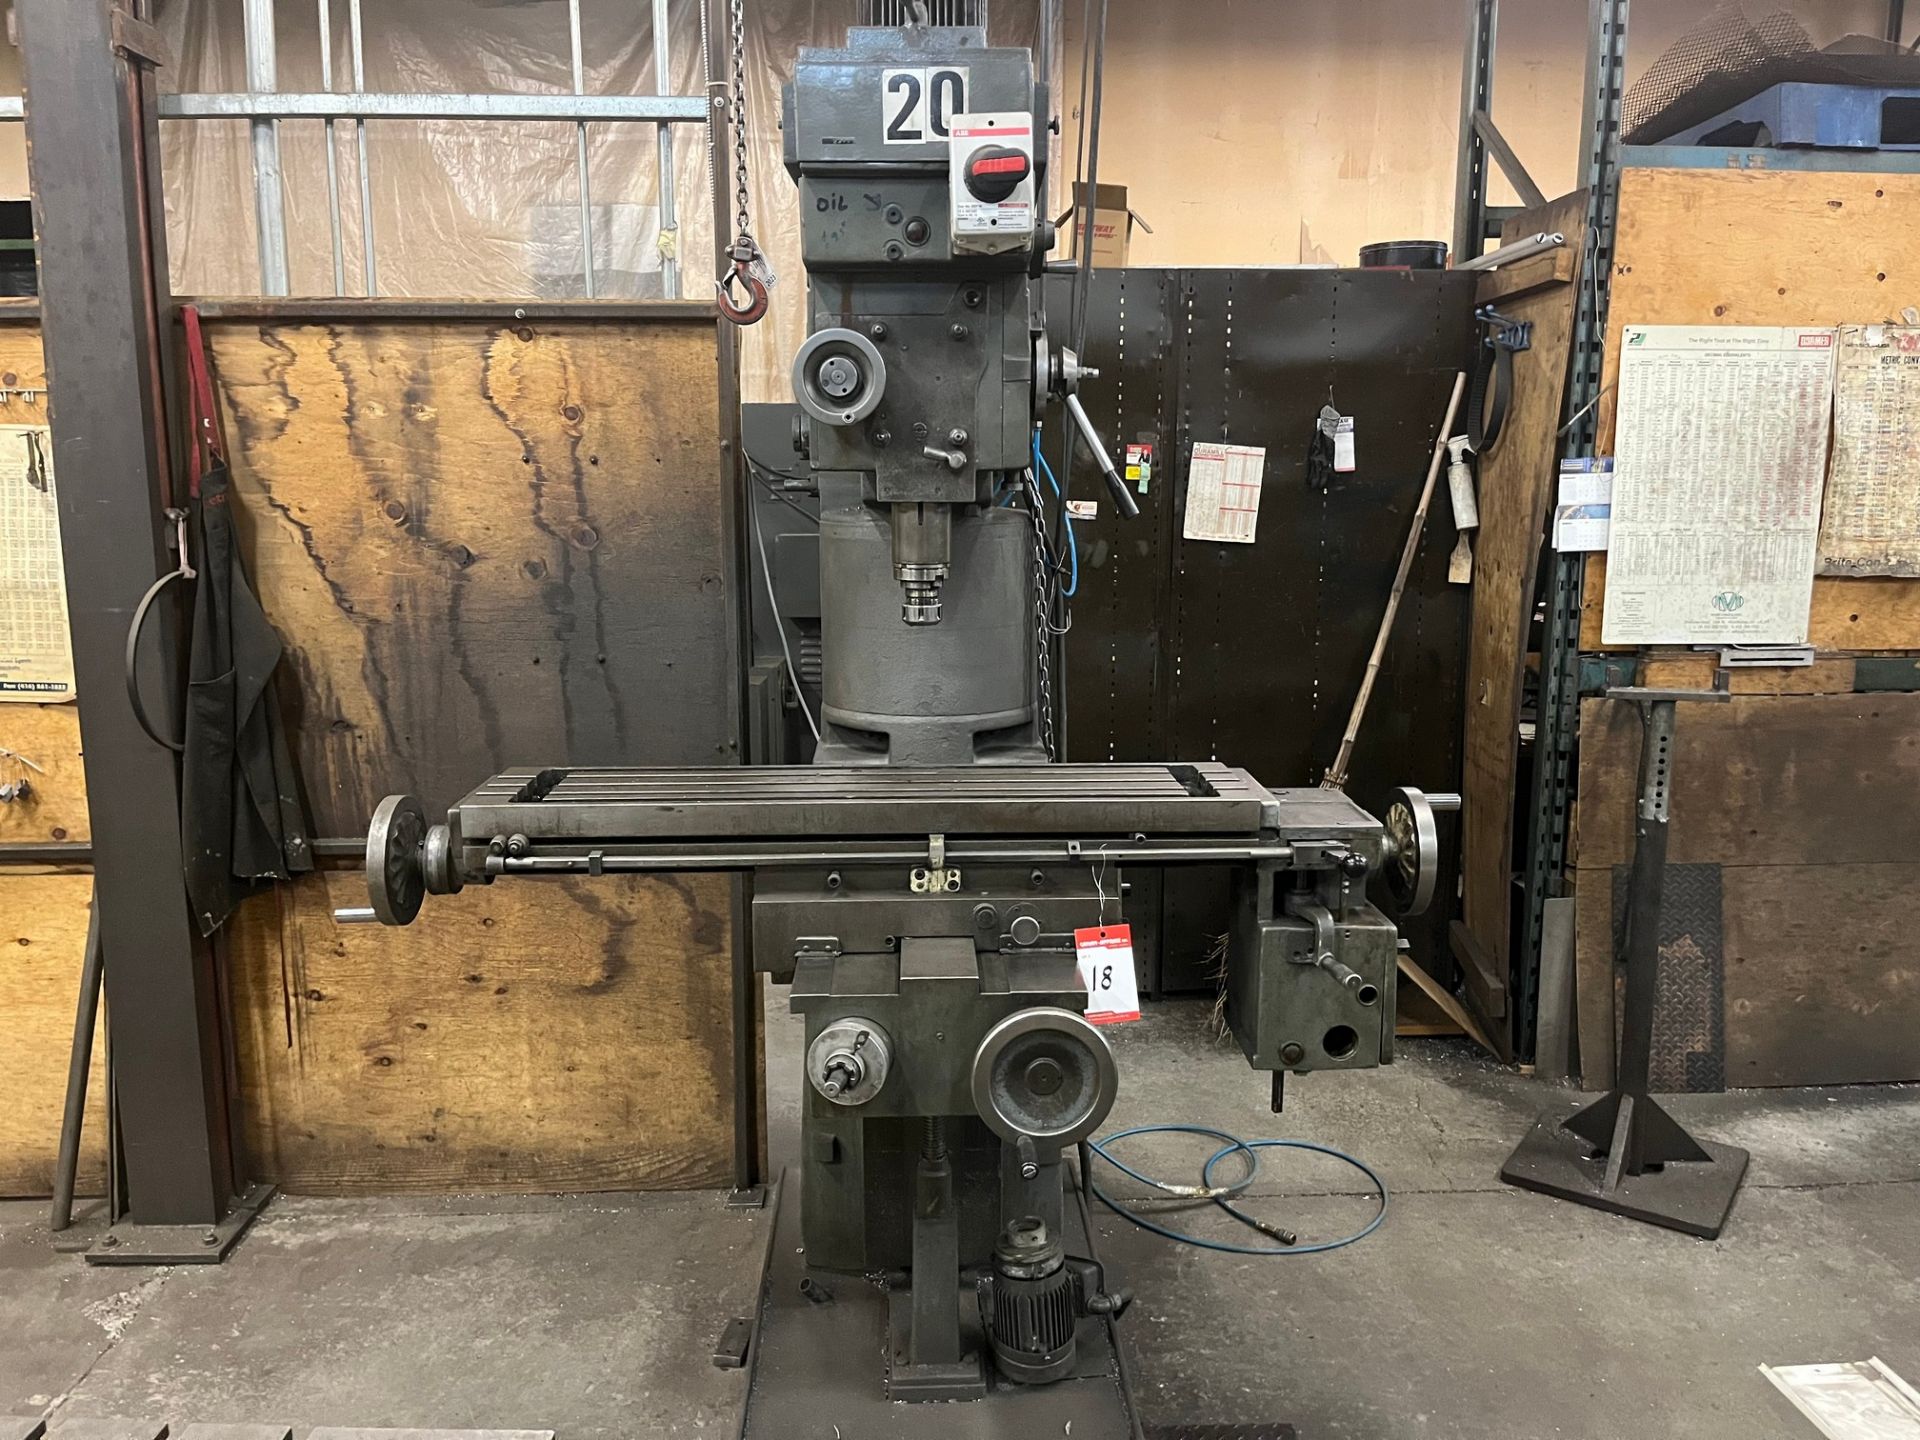 VERTICAL MILLING MACHINE, X-AXIS POWER FEED, 10” X 42” TABLE, 40 NMT SPINDLE, 84 – 2,750 RPM, STEP